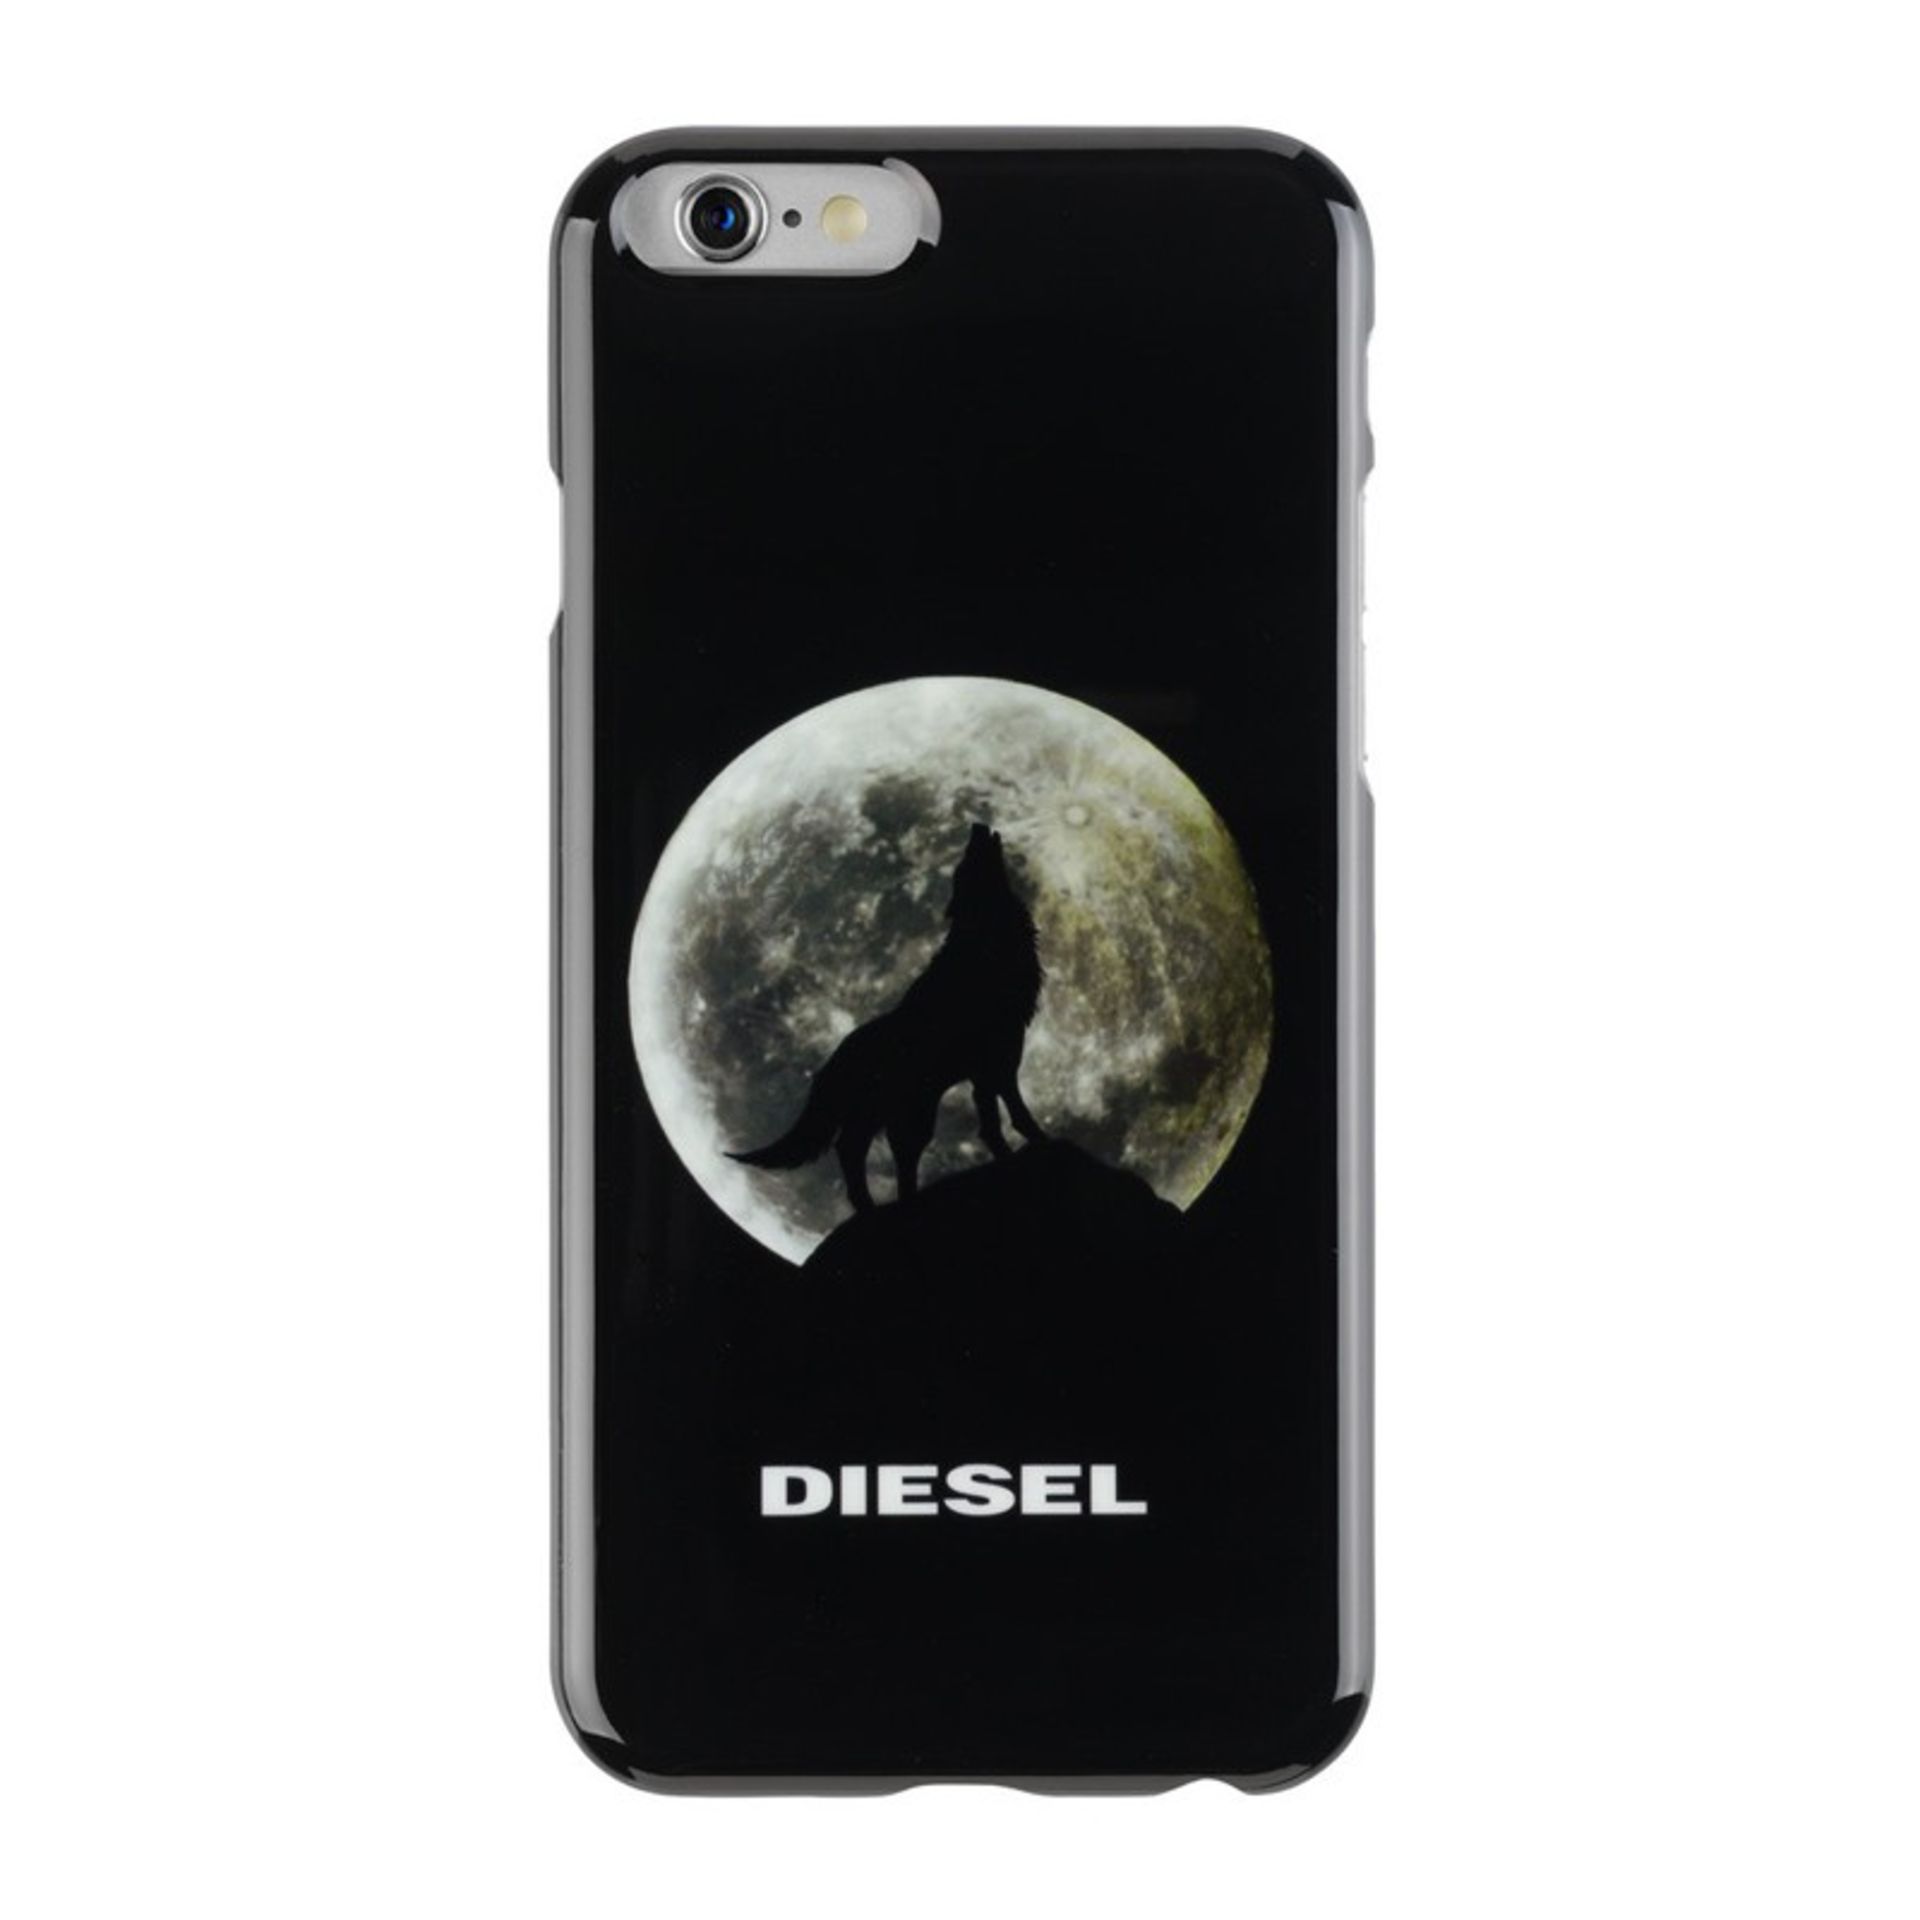 V *TRADE QTY* Brand New Diesel Pluton 6 Hard Snap Case For iPhone 6 ISP Price 19.90 Euros X 6 YOUR